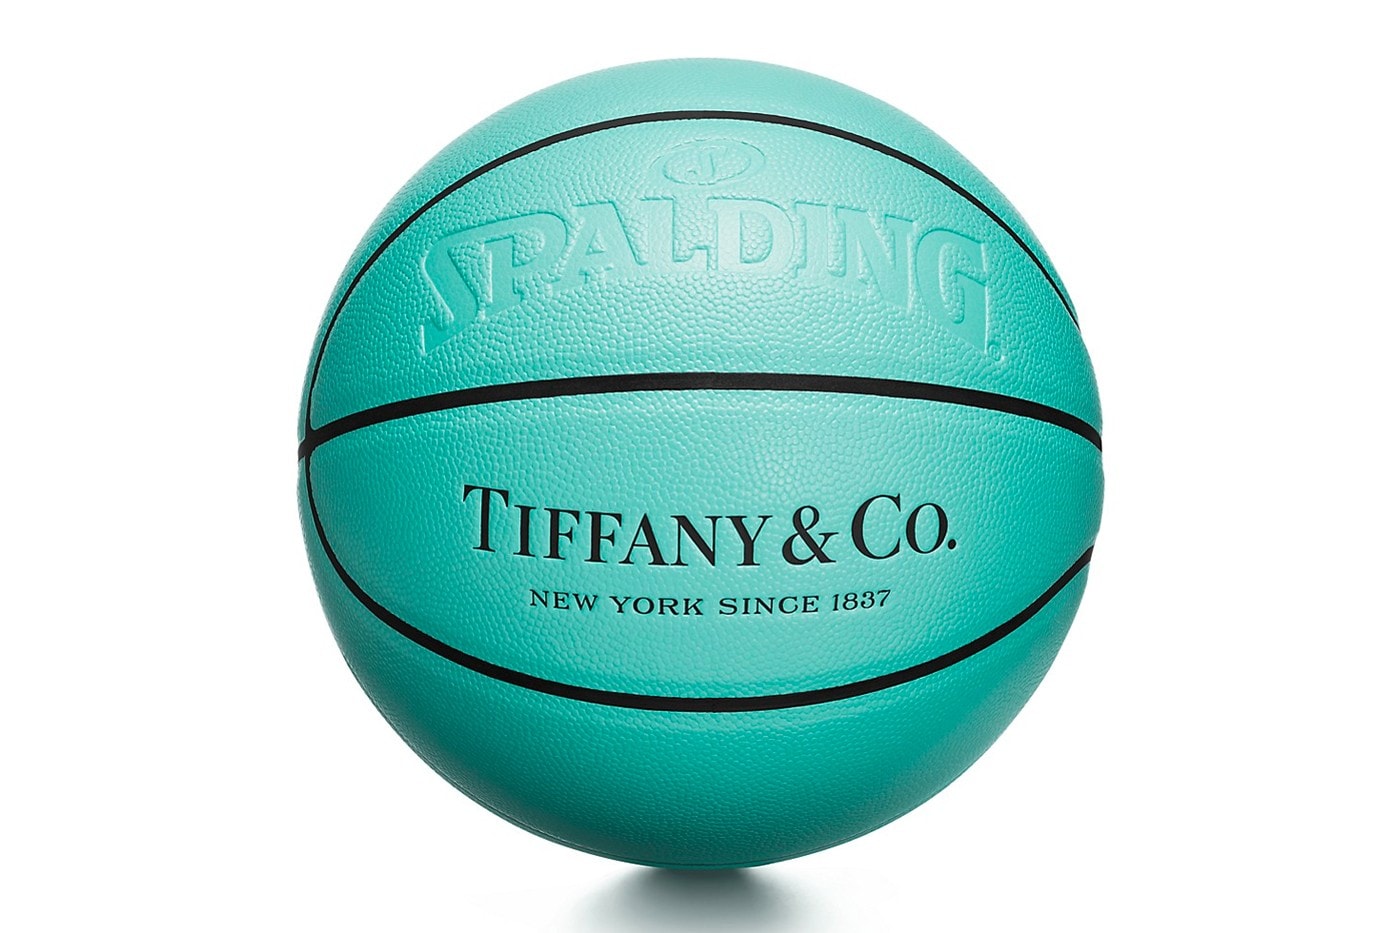 Tiffany & Co. Tokyo Cat Street Exclusive Sports Capsule Basketball Football Soccer Skateboarding Rugby Accessories